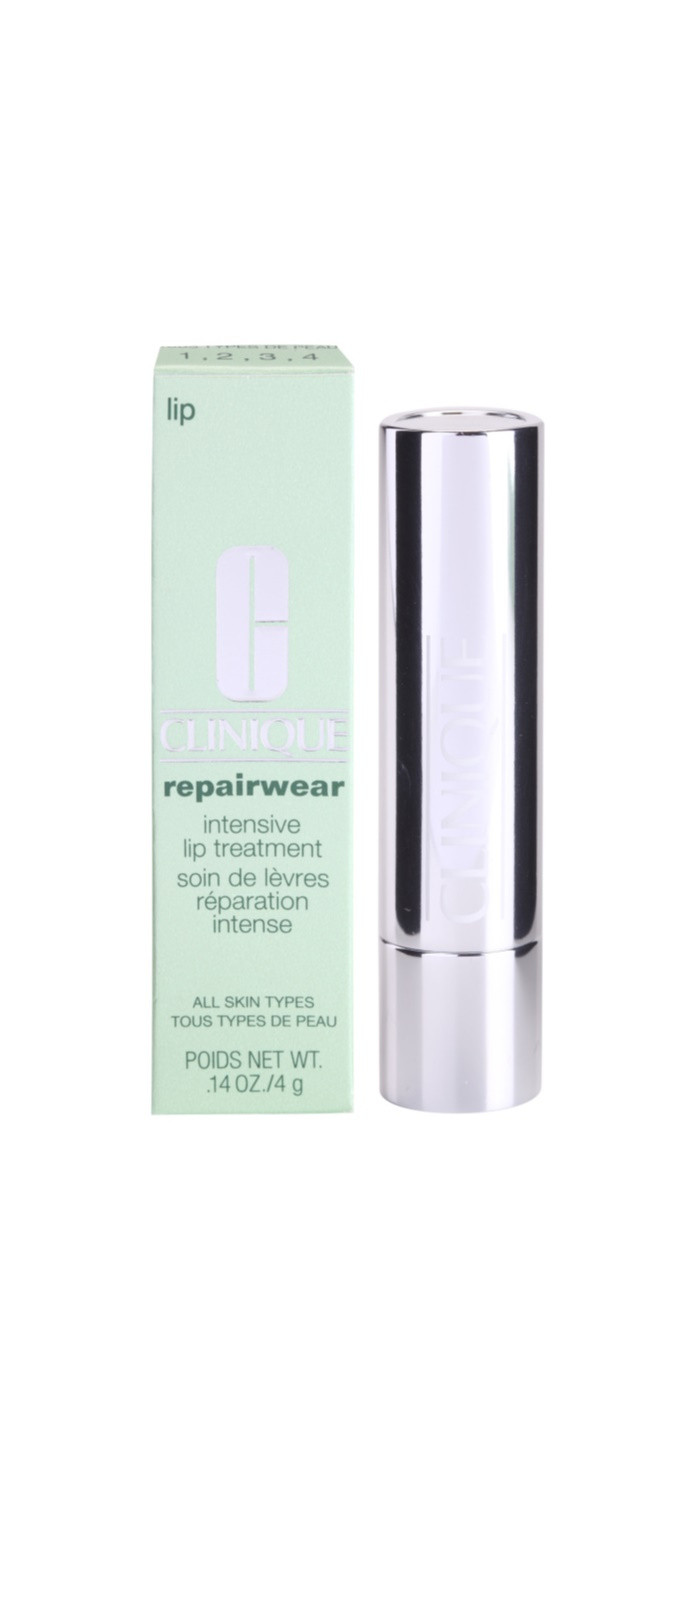 Clinique repairwear intensive lip treatment 3,6 g, Green, large image number 0